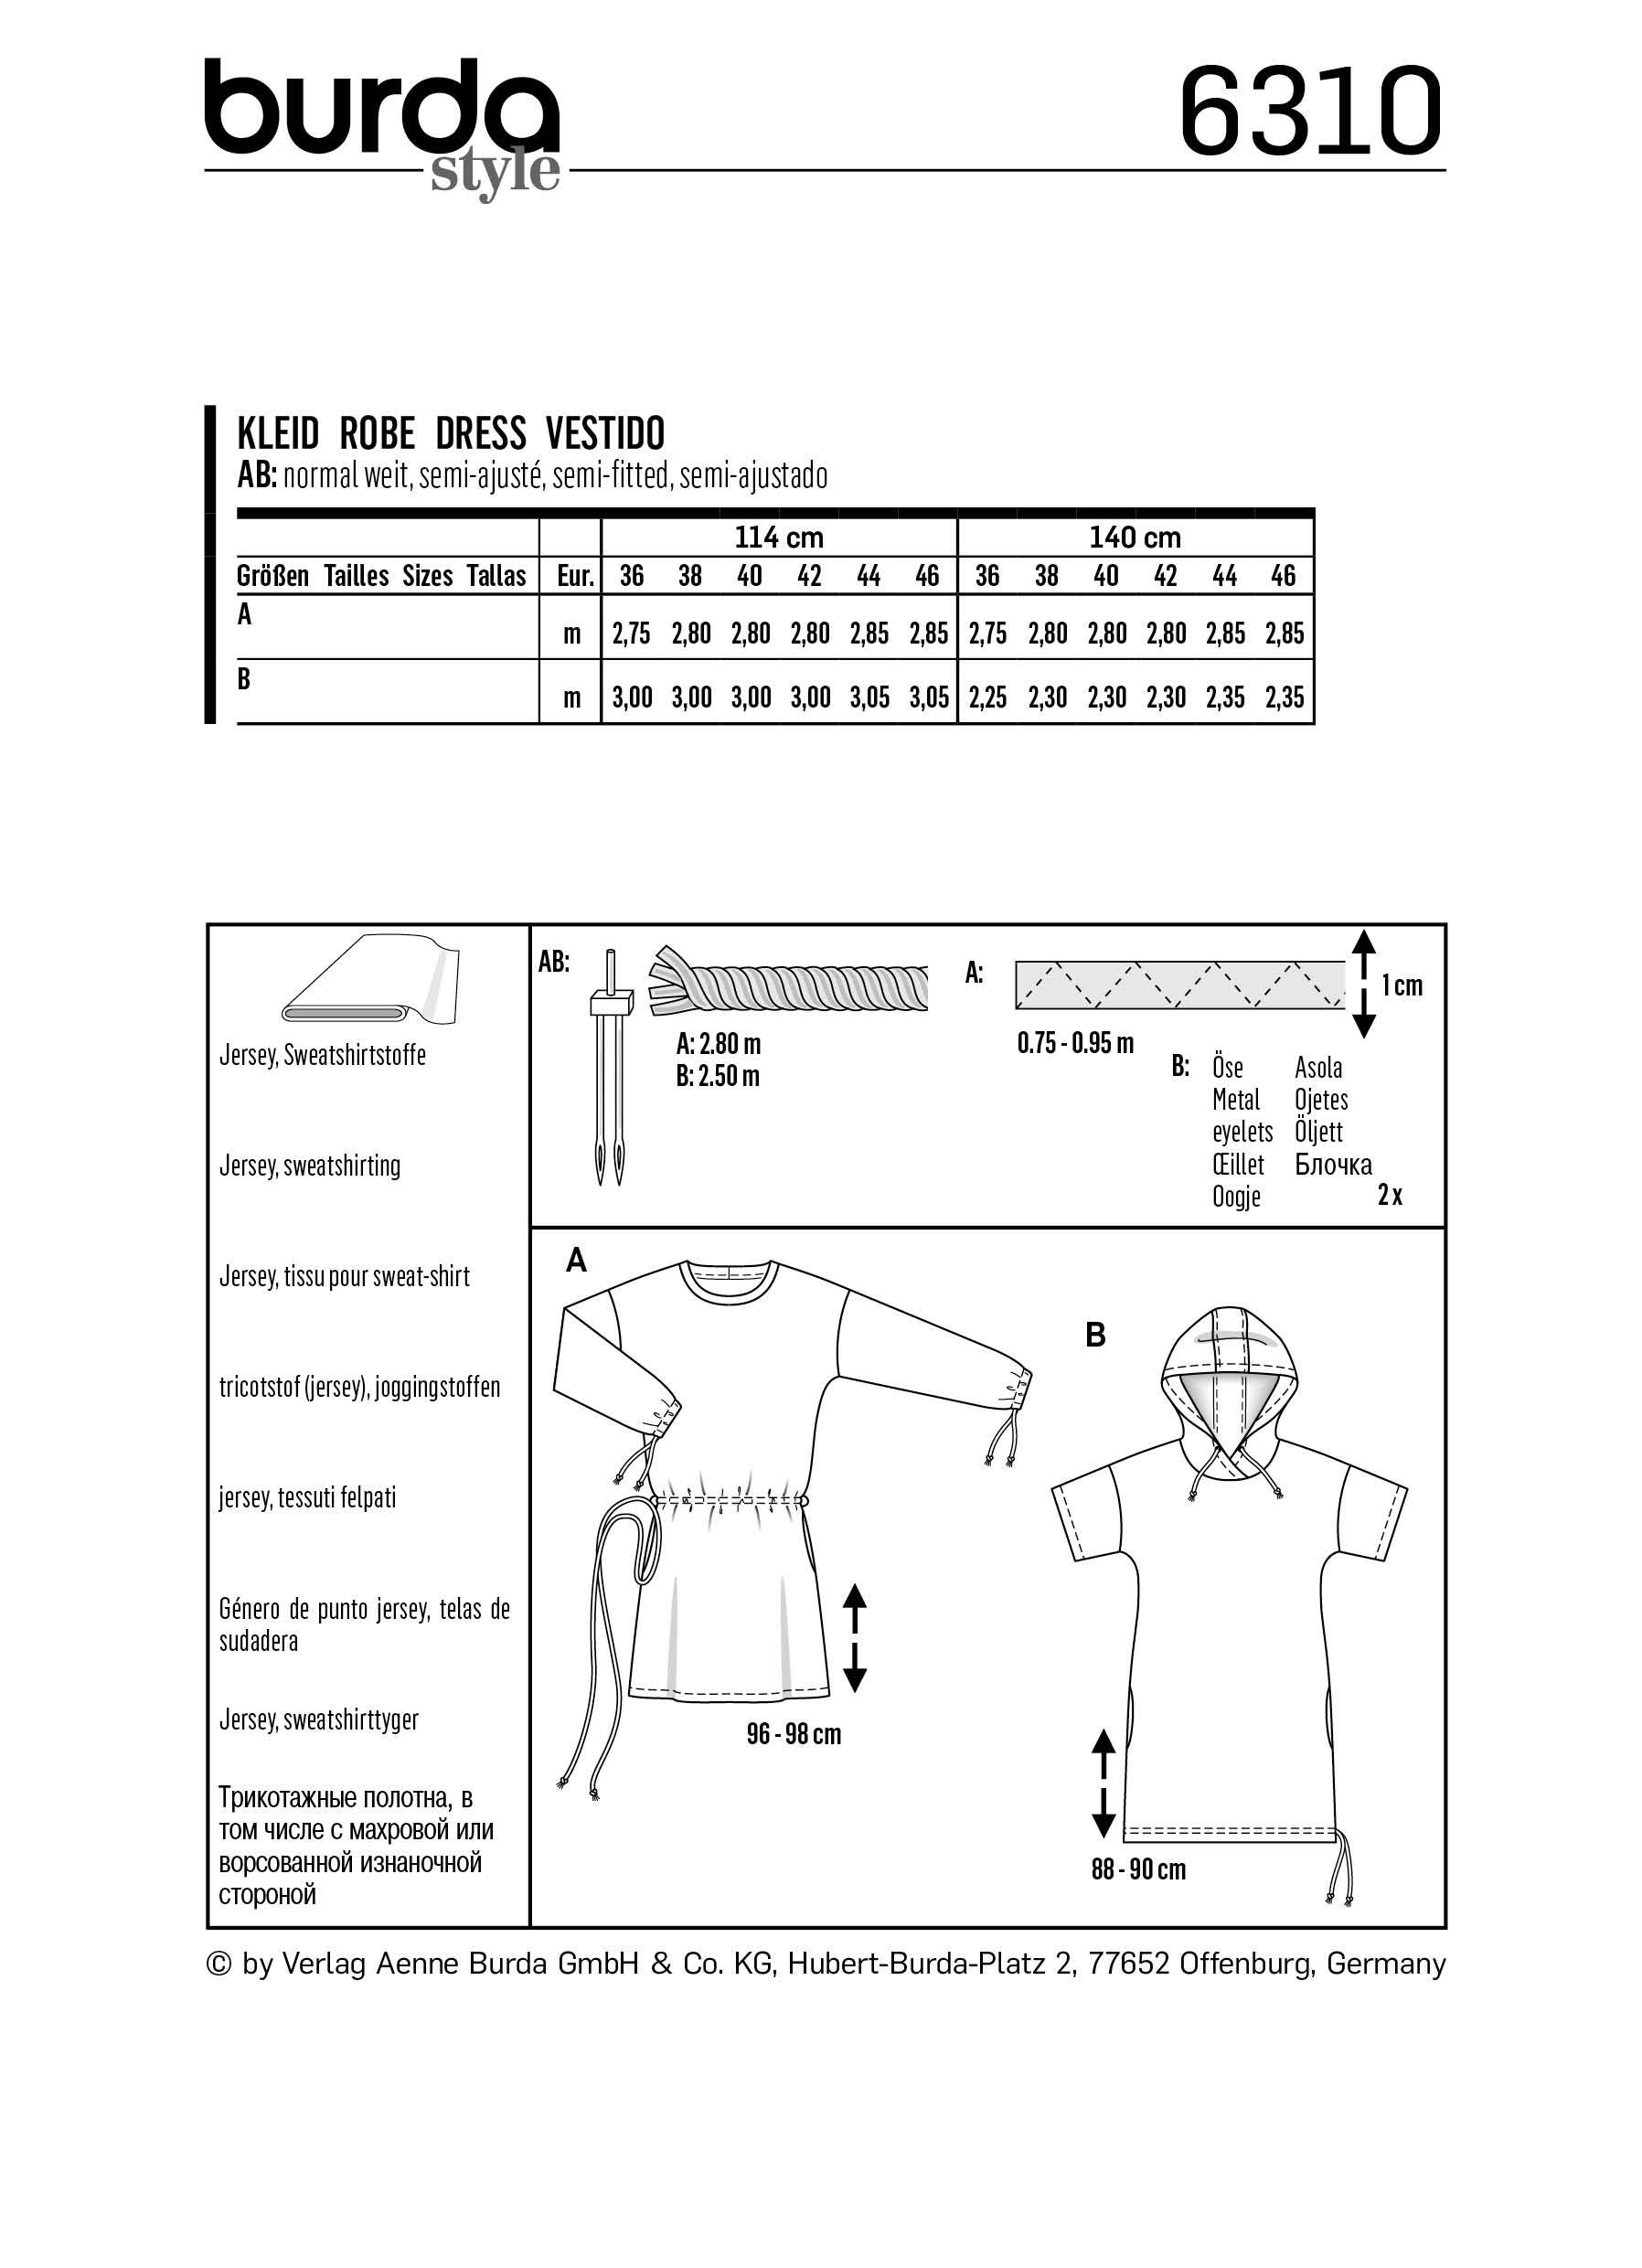 BD6310 Misses' shirt dress sewing pattern from Jaycotts Sewing Supplies